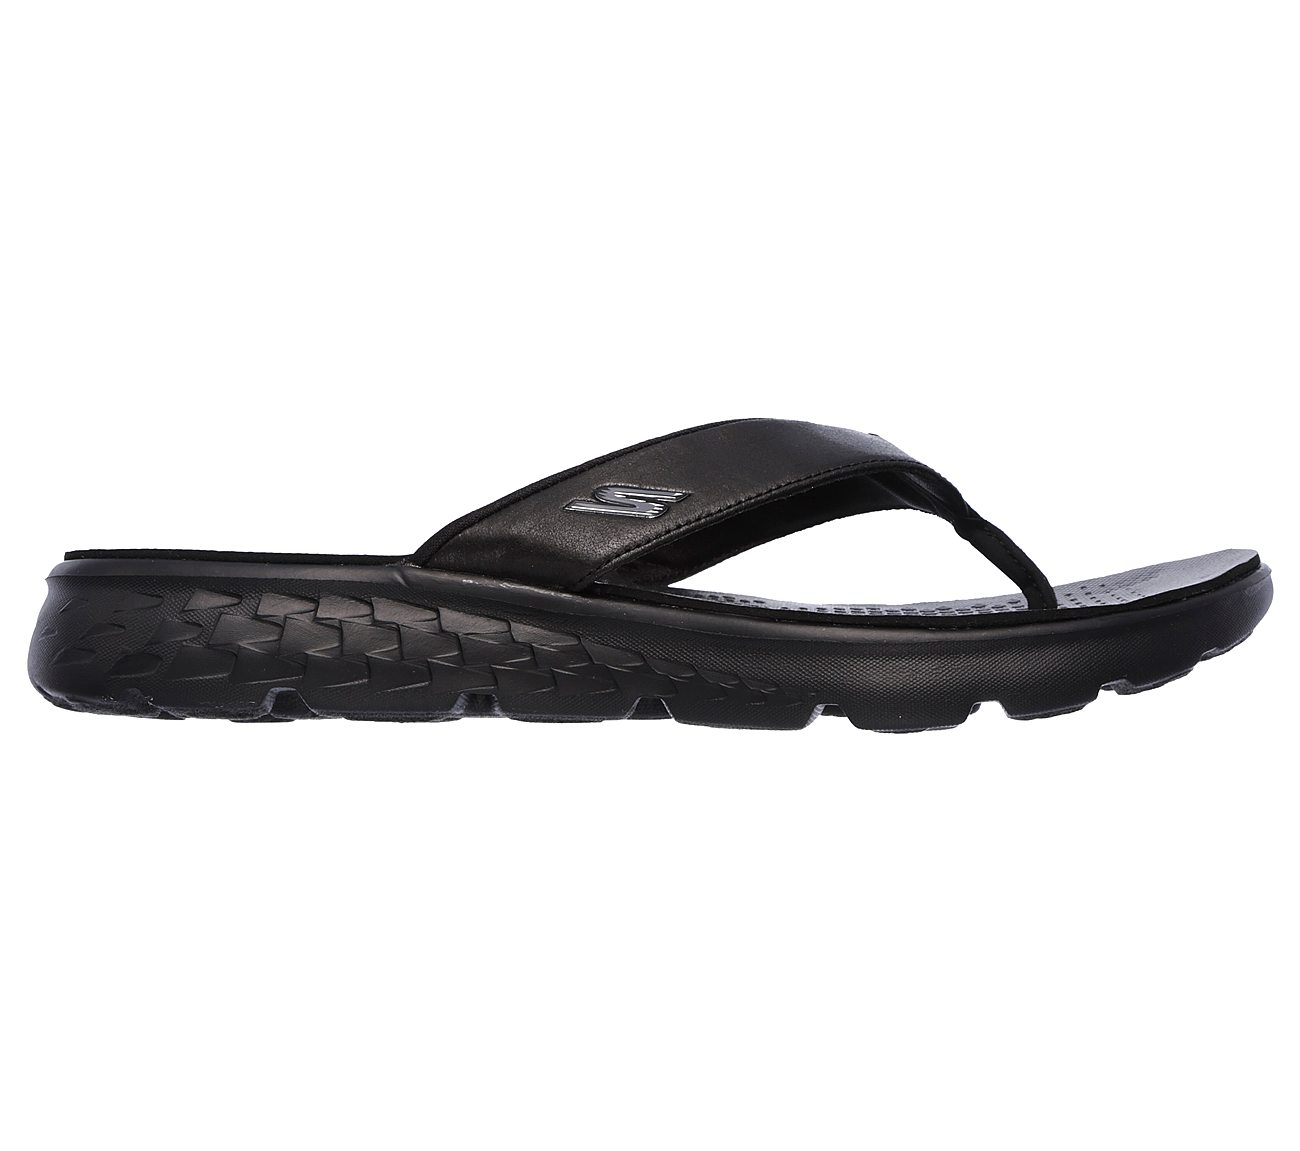 ON-THE-GO 400 - VISTA, BBLACK Footwear Right View